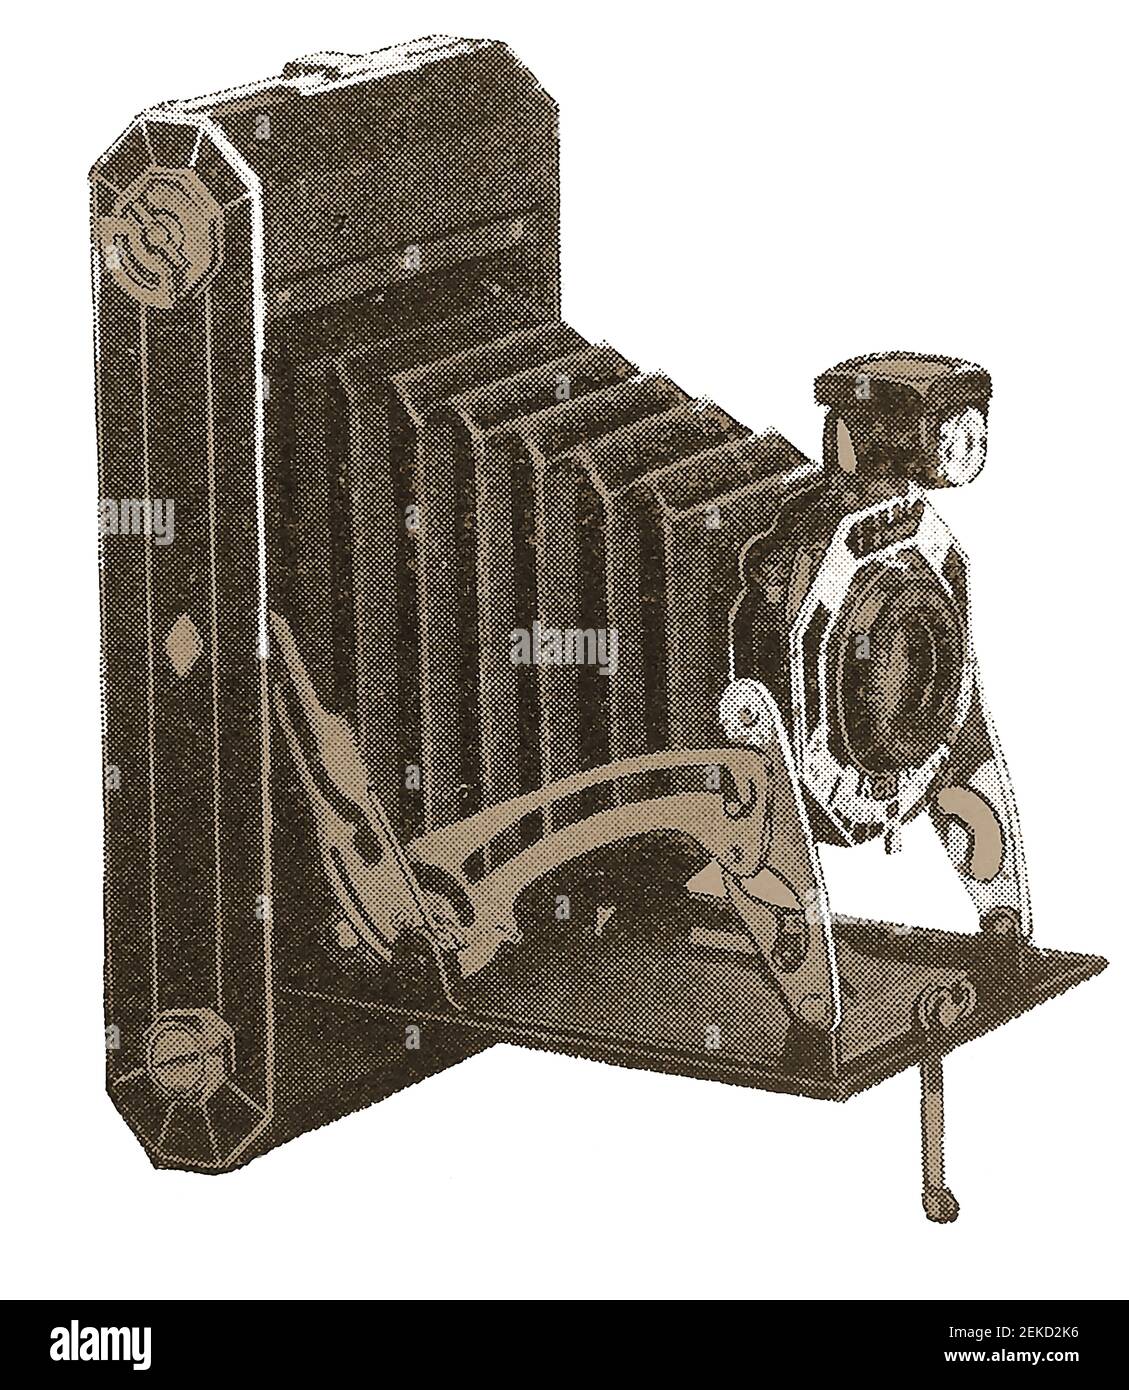 A typical early small Kodak roll film camera, designed to fold up for easy carrying. Stock Photo